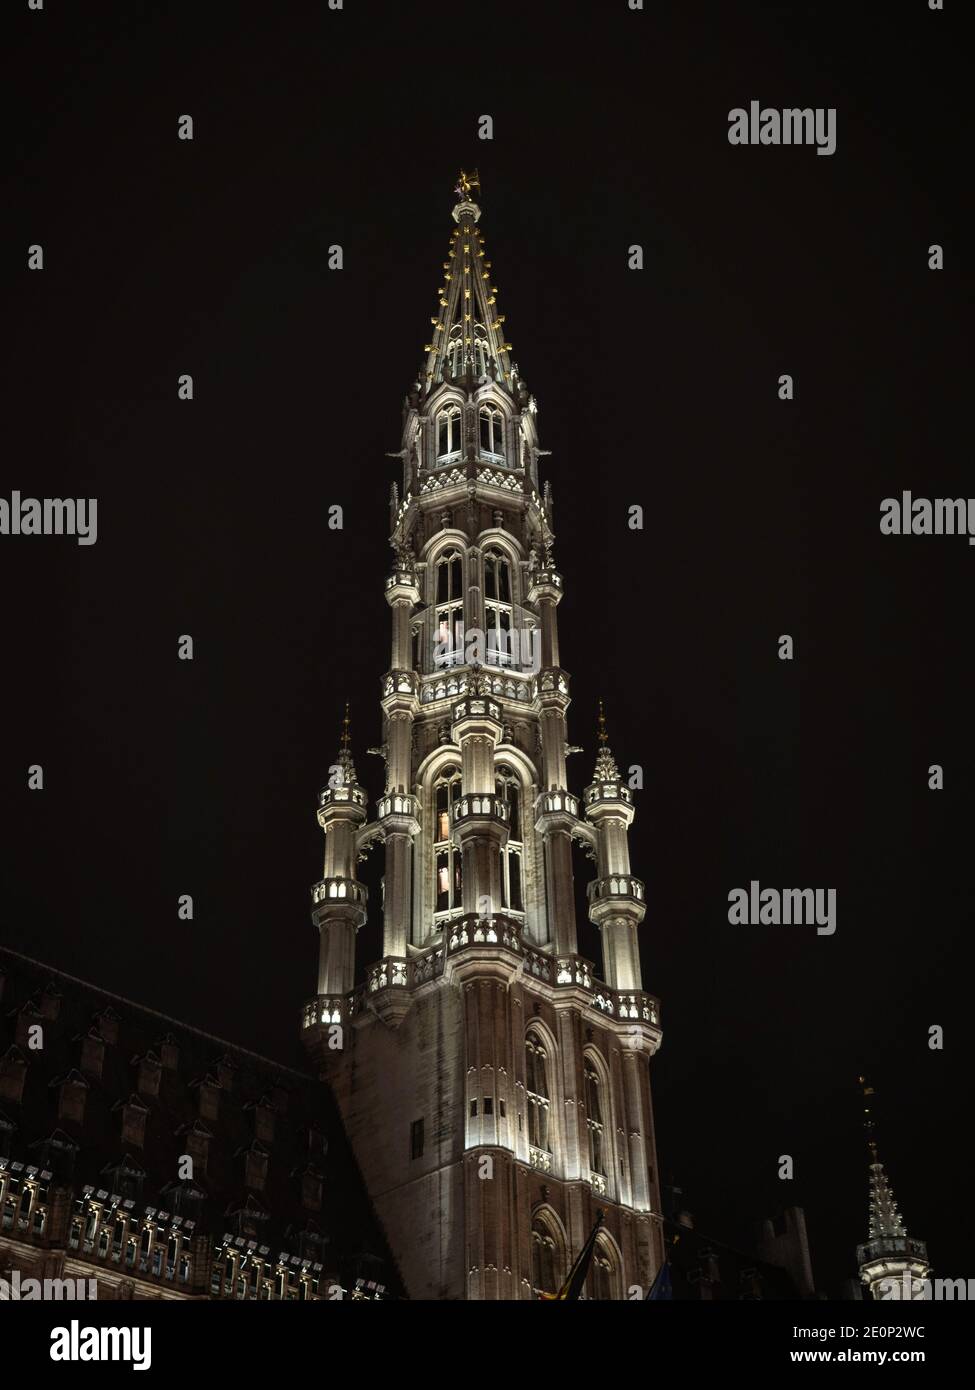 Illuminated spire tower of Brussels City Town Hall Stadhuis medieval gothic architecture at grand place grote markt square in night sky Bruxelles Belg Stock Photo